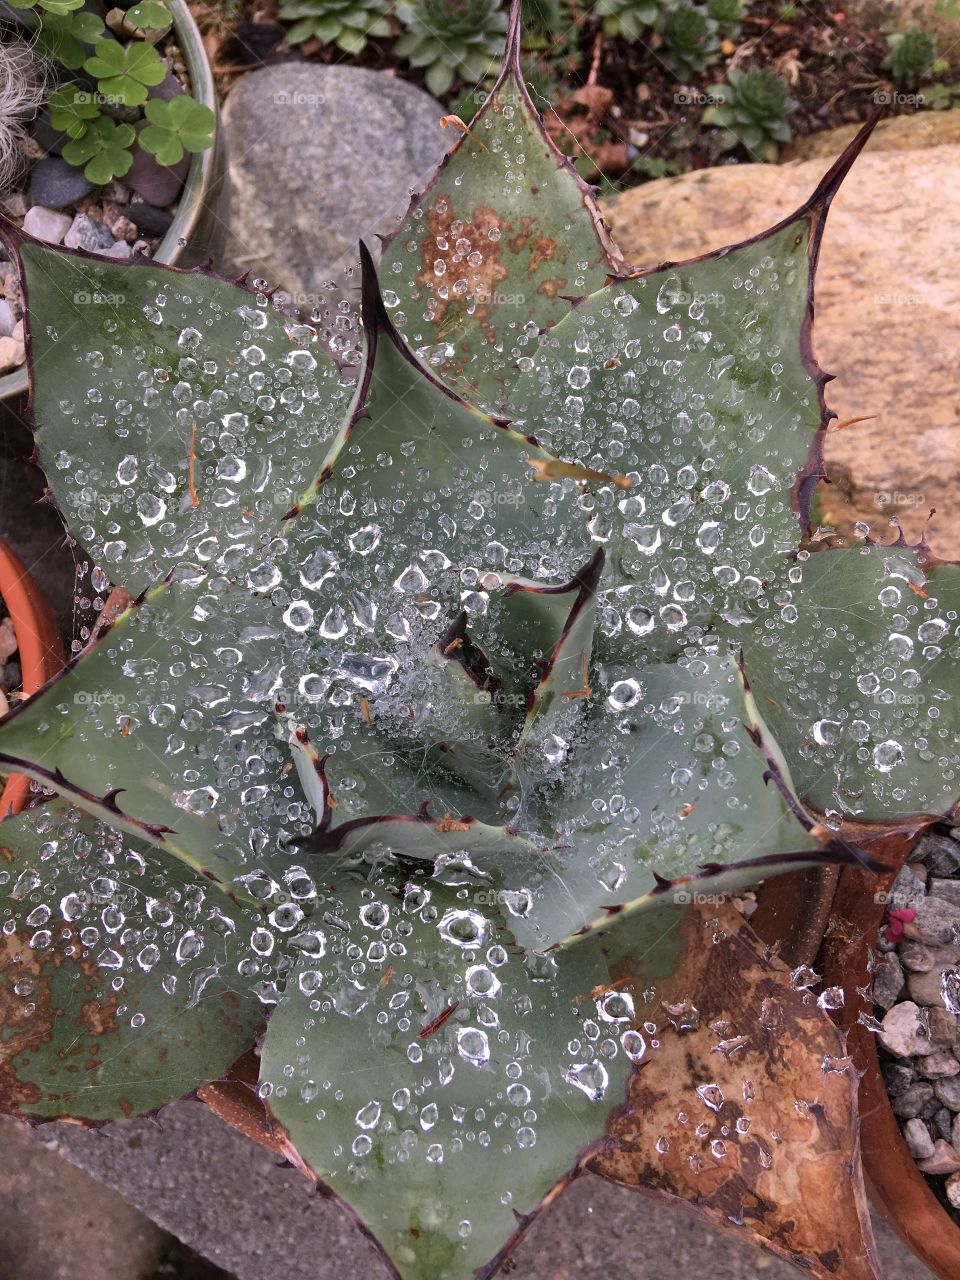 Spider web on cactus caught so many water droplets.